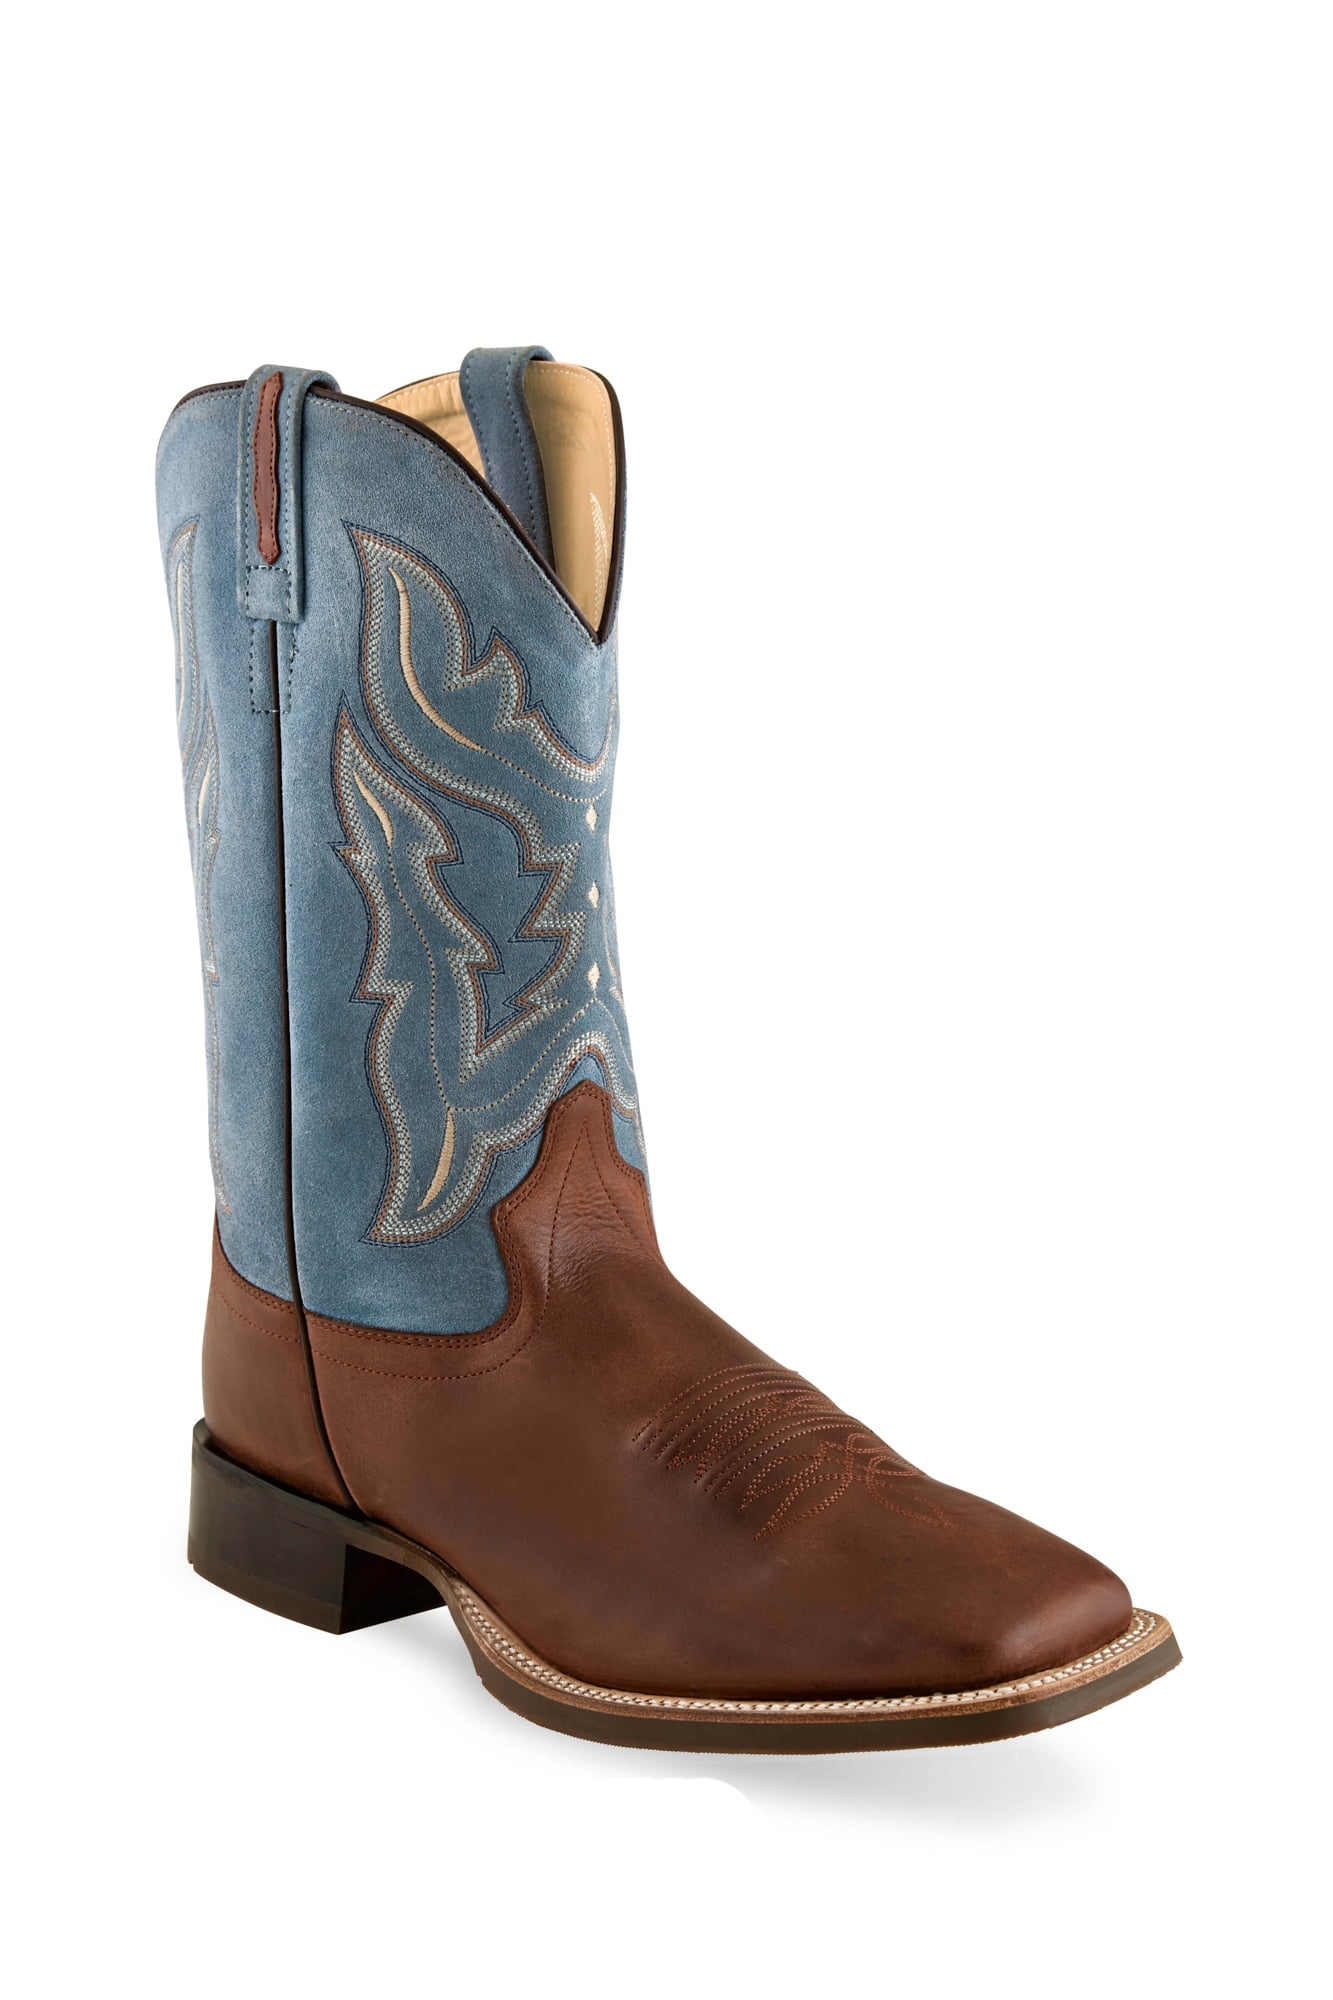 old west jama boots